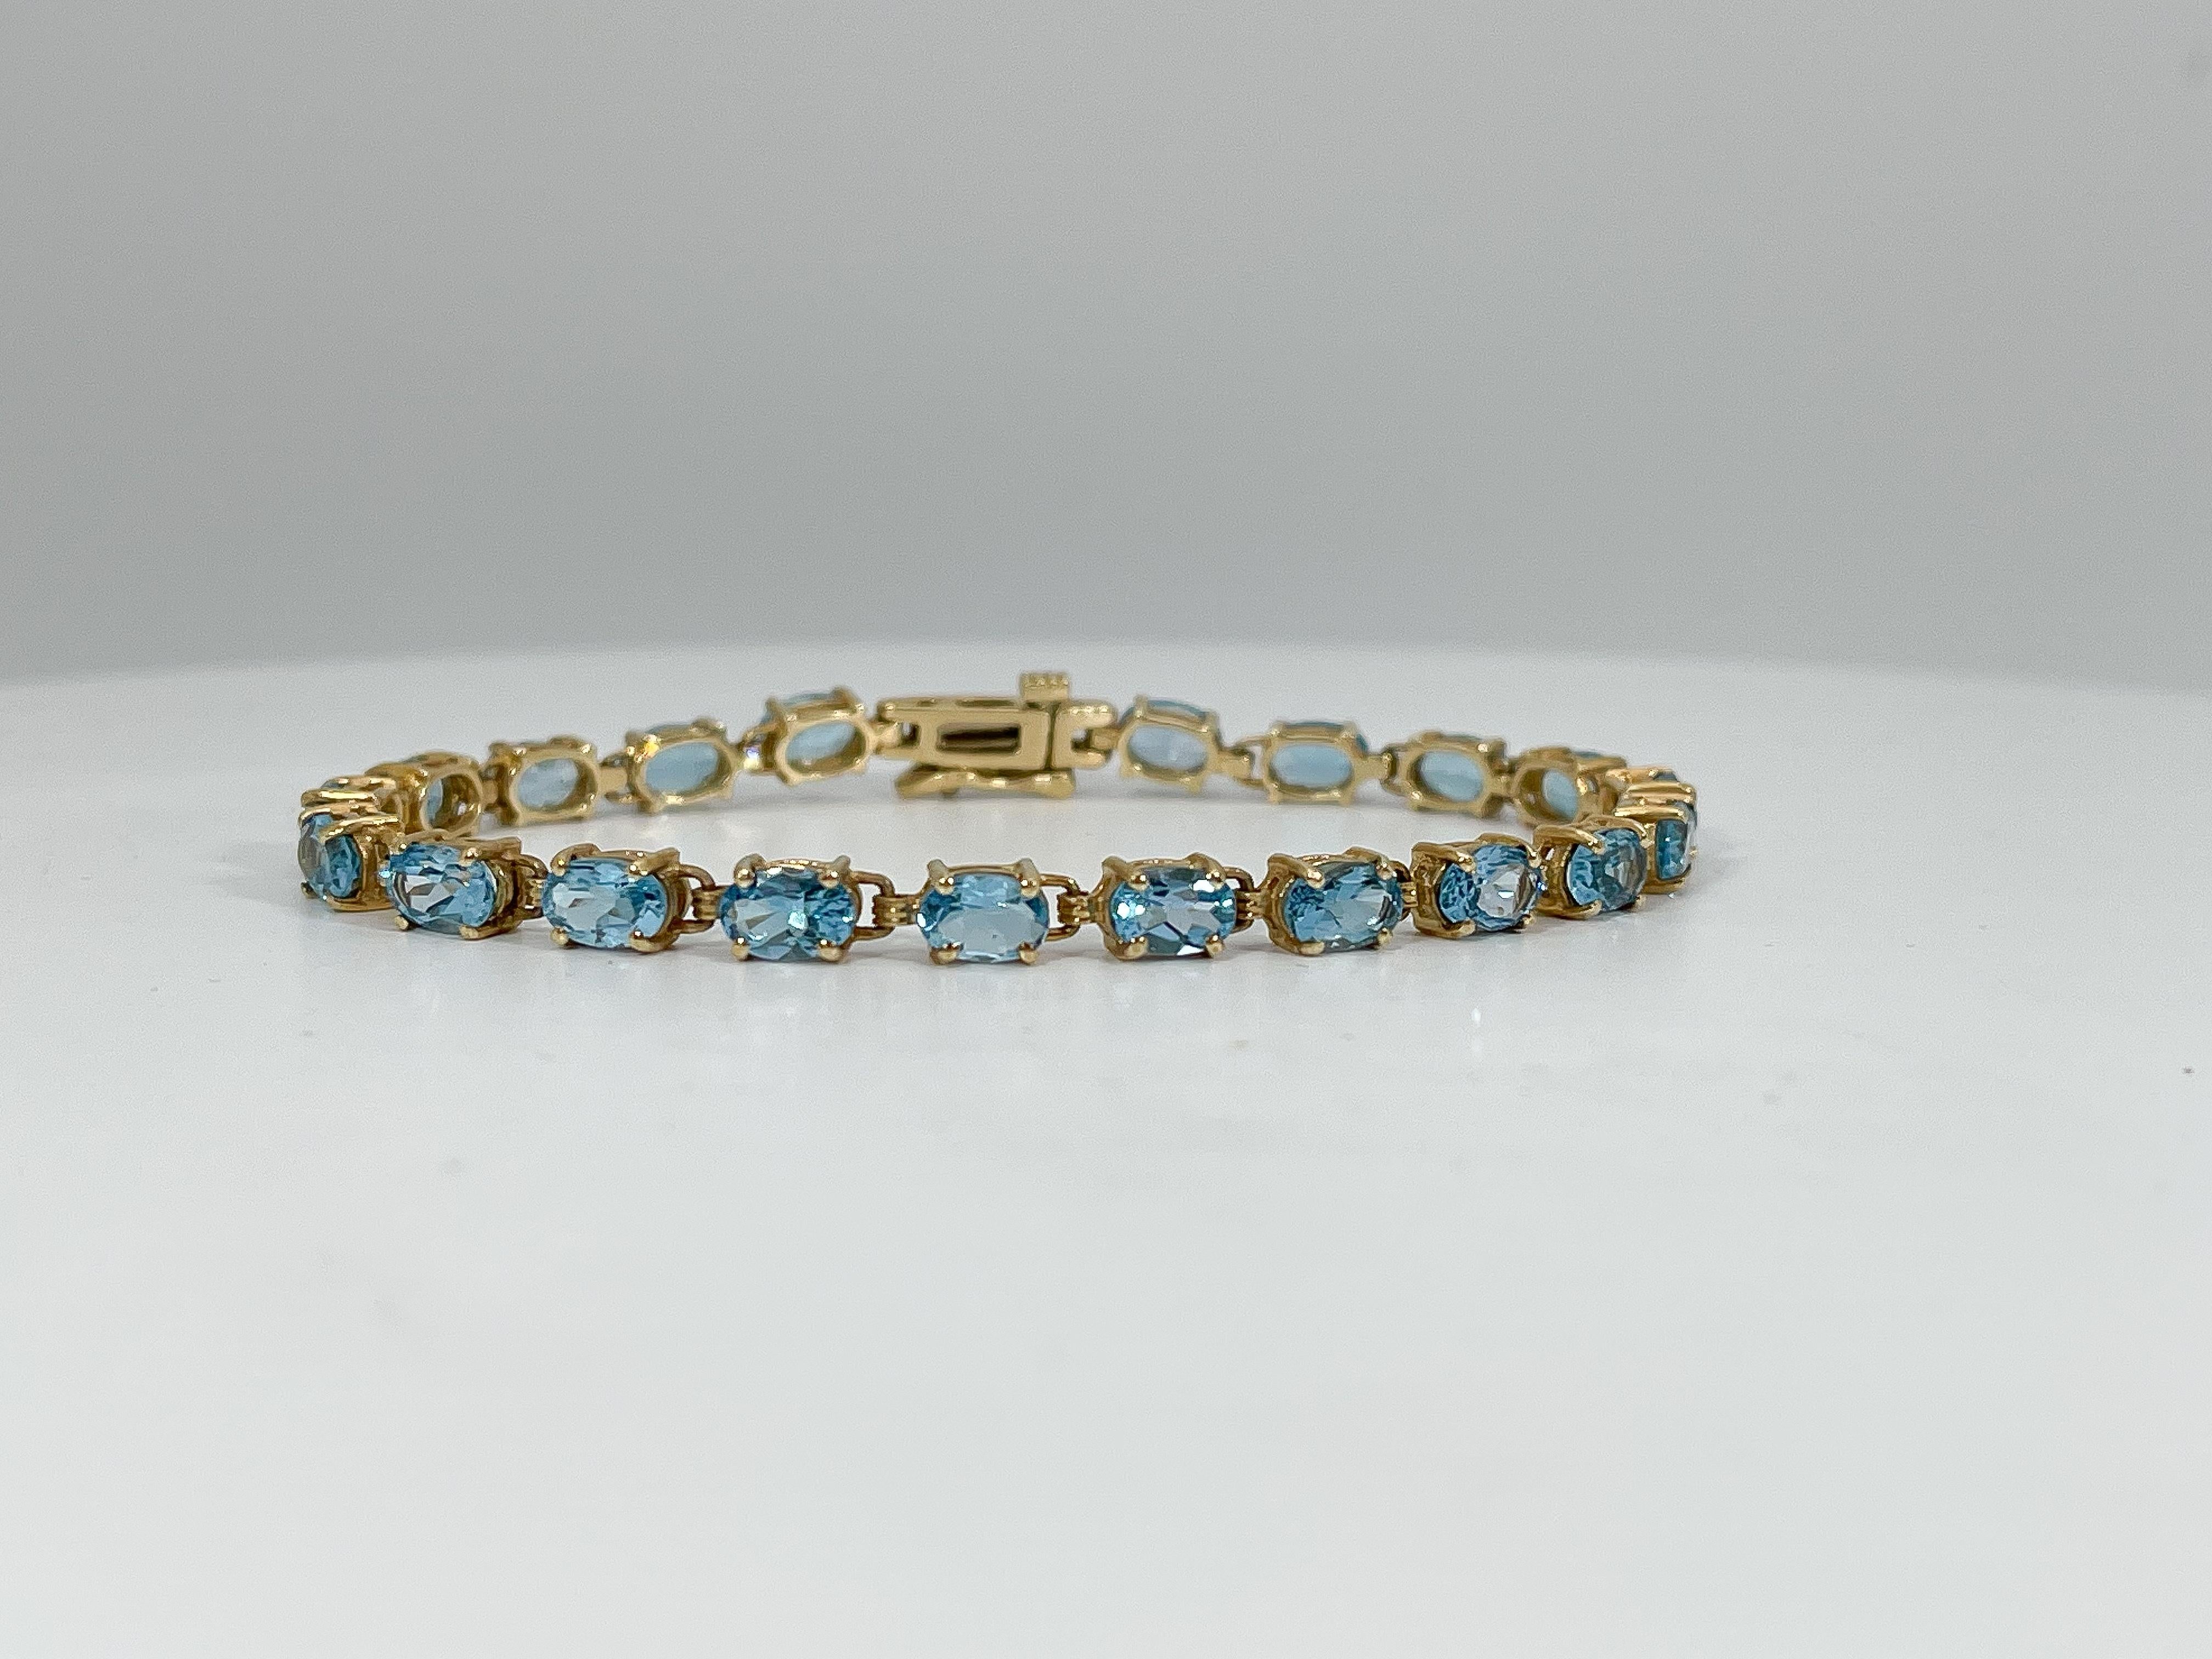 14k yellow gold oval blue topaz bracelet. This bracelet has 20 stones, a figure 8 clasp to open and close, the width of the bracelet is  4 mm, has a length of 7 inches, and a total weight of 10.18 grams.